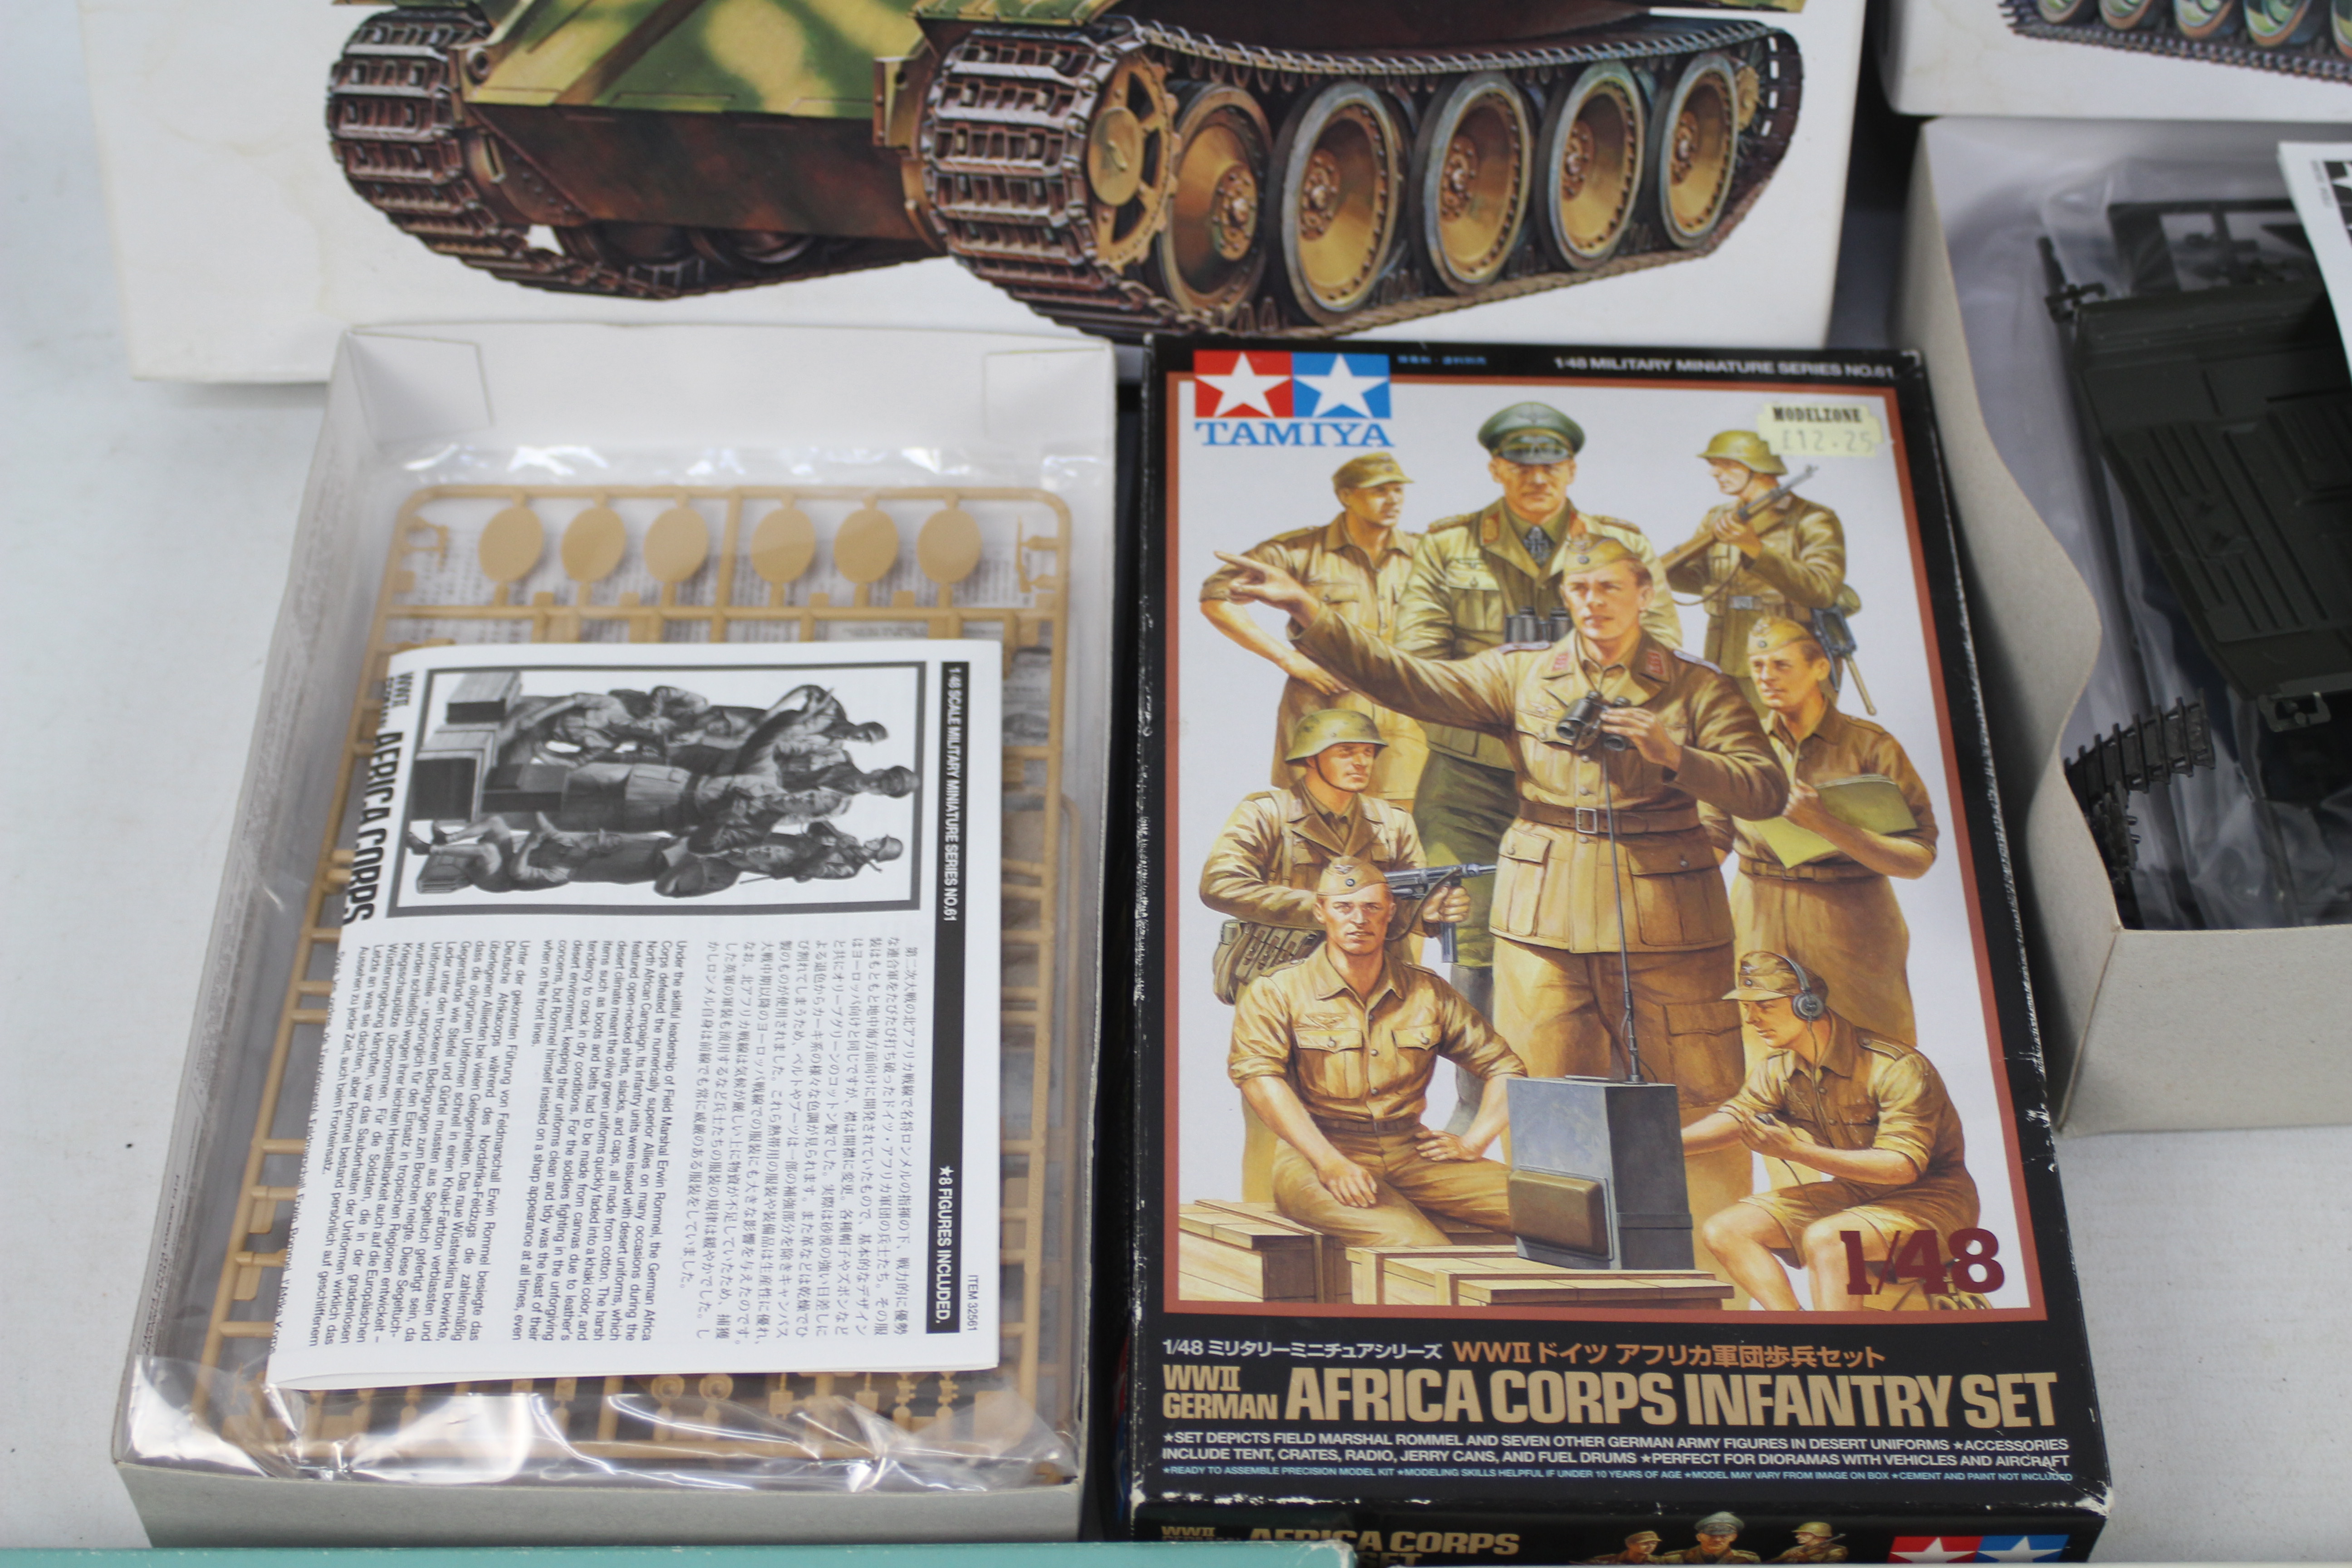 Tamiya - Dragon - Eight boxed plastic military vehicle and personnel model kits in a variety of - Image 2 of 3